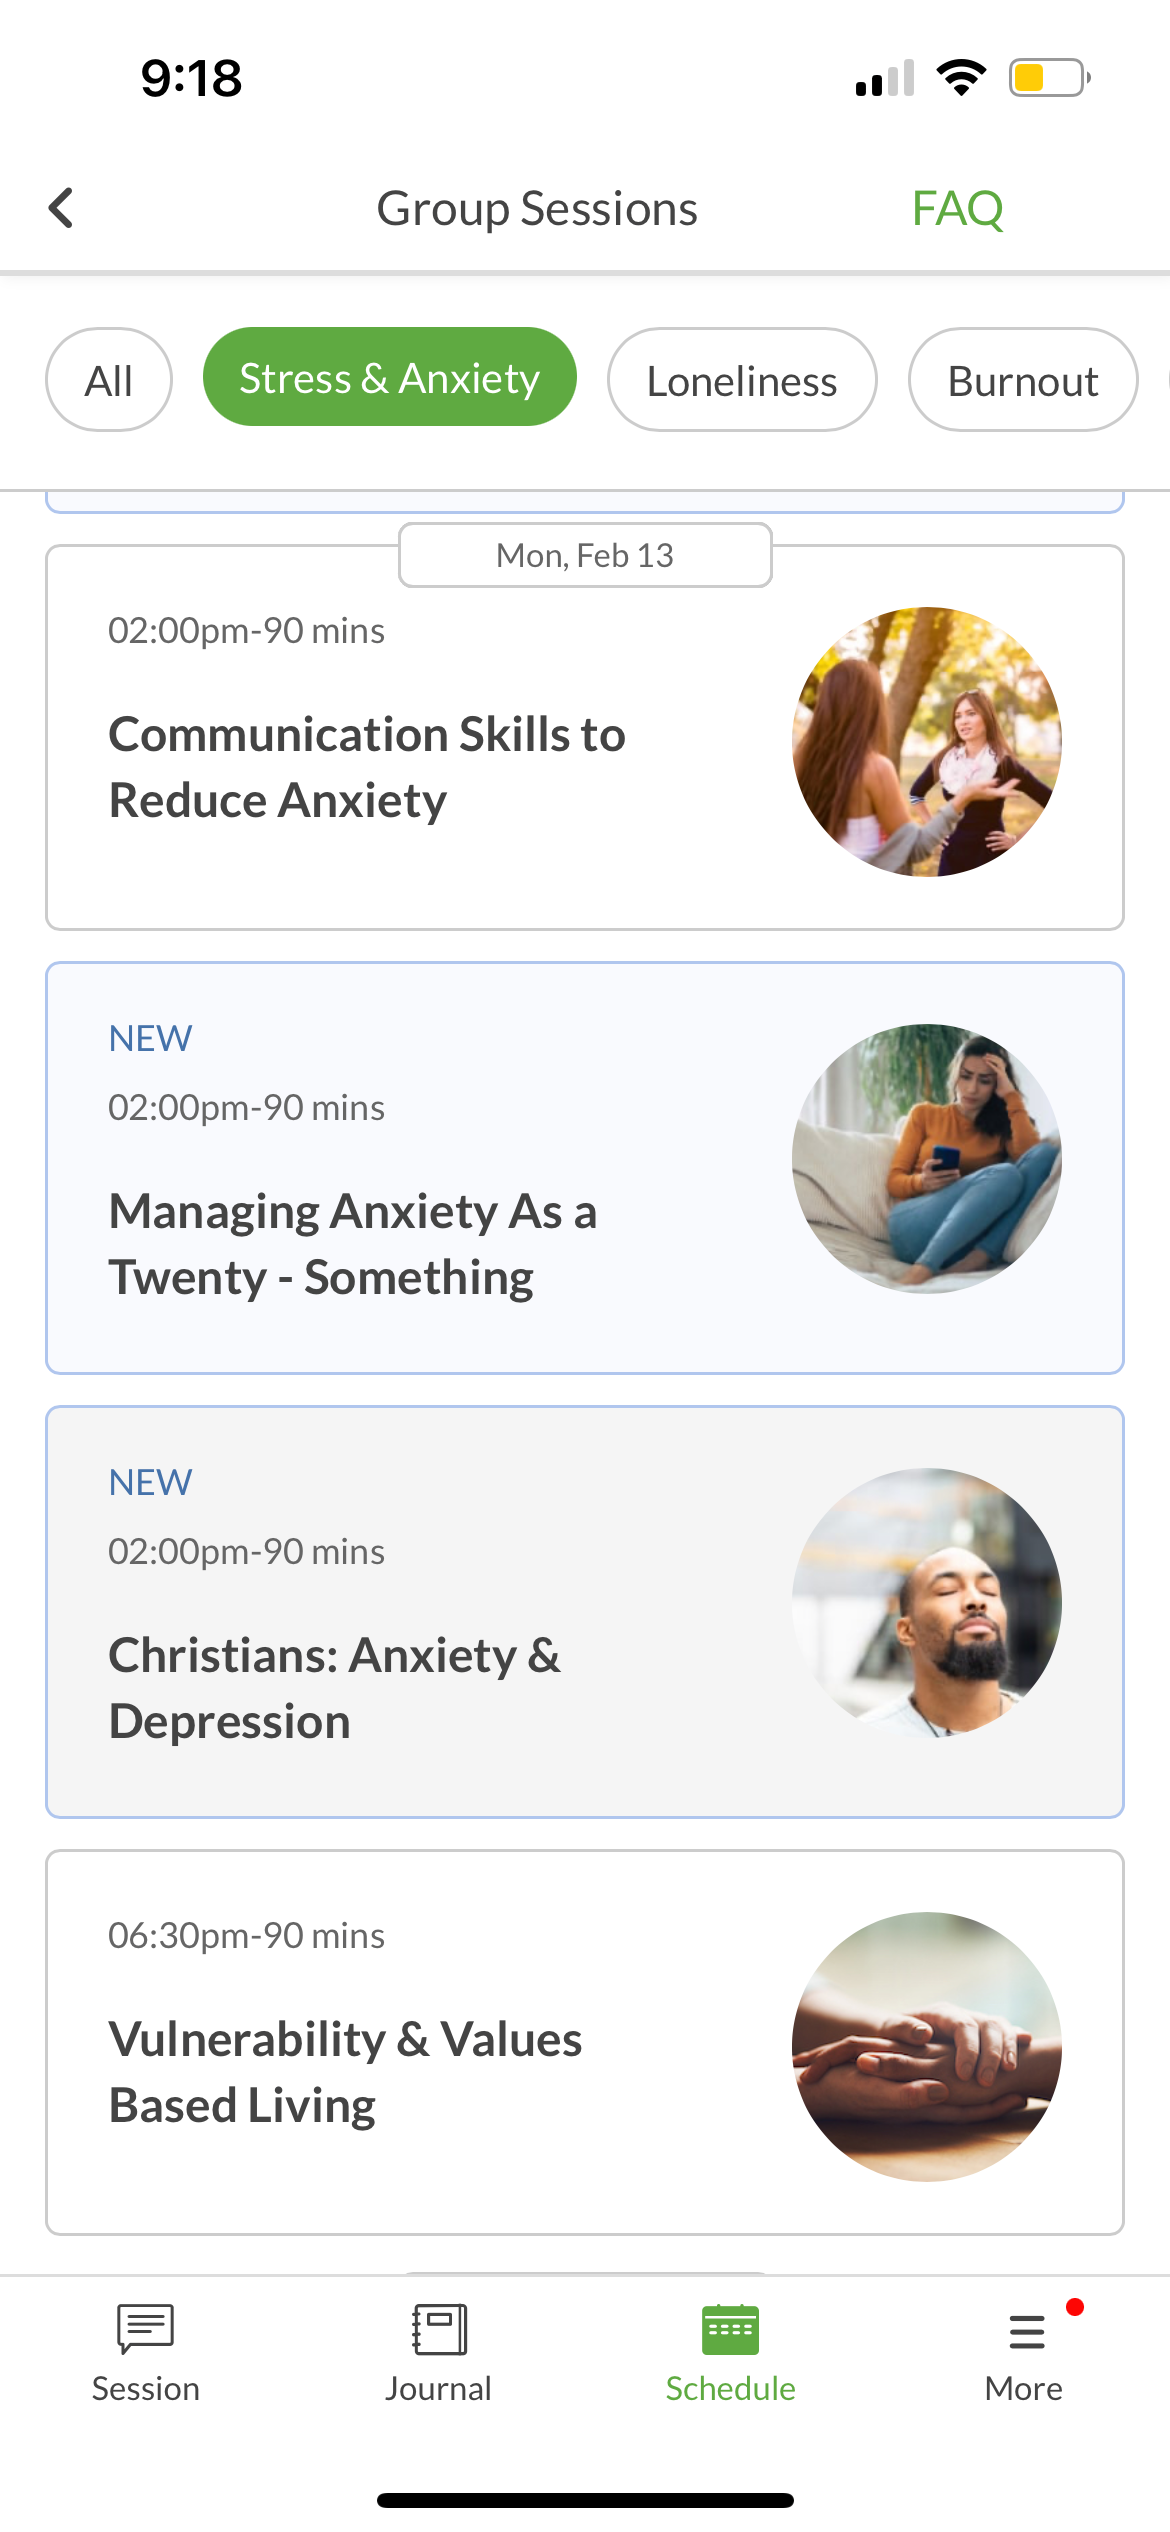 Group sessions are shown on the BetterHelp app.